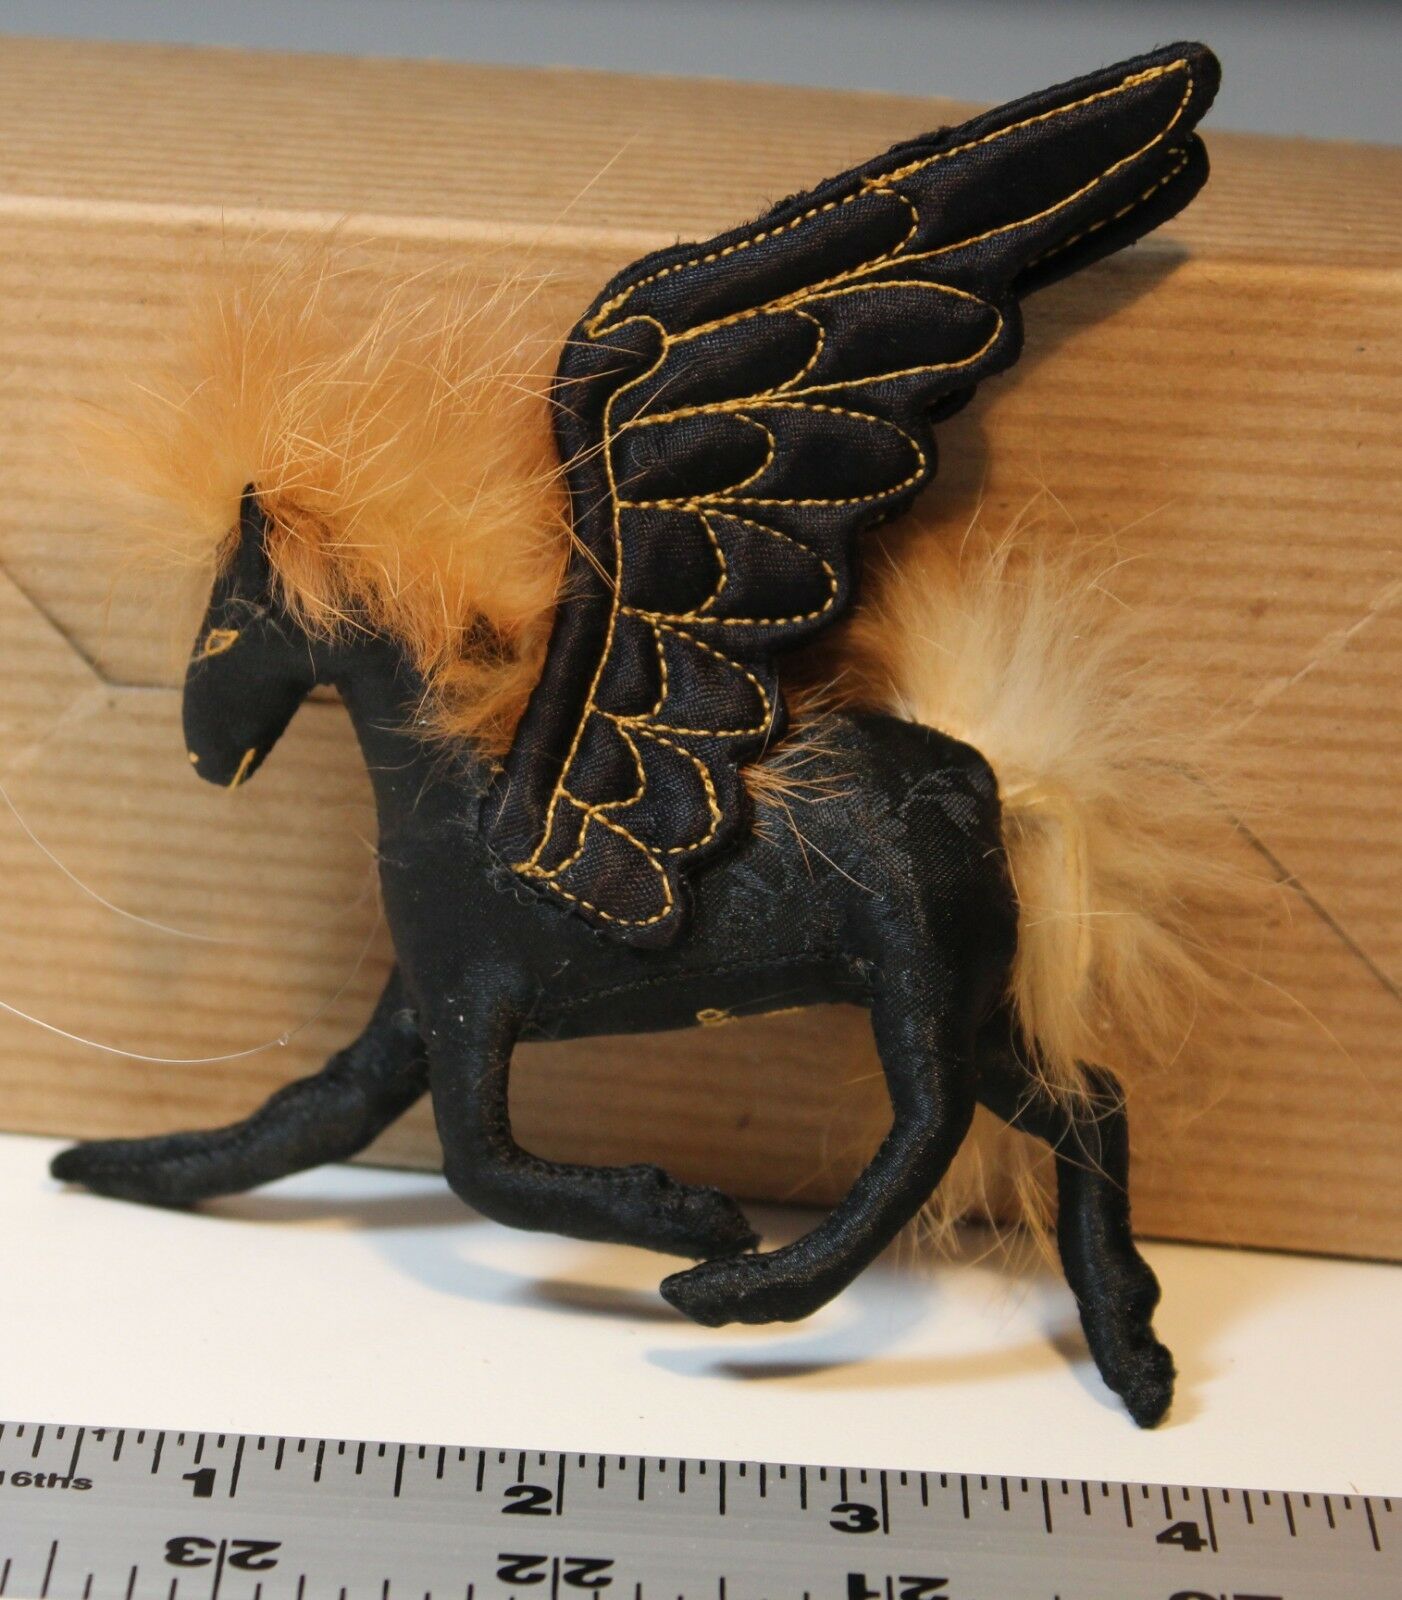 Pegasus Winged Horse Artisan Sculpted And Sewn Fabric Ornament